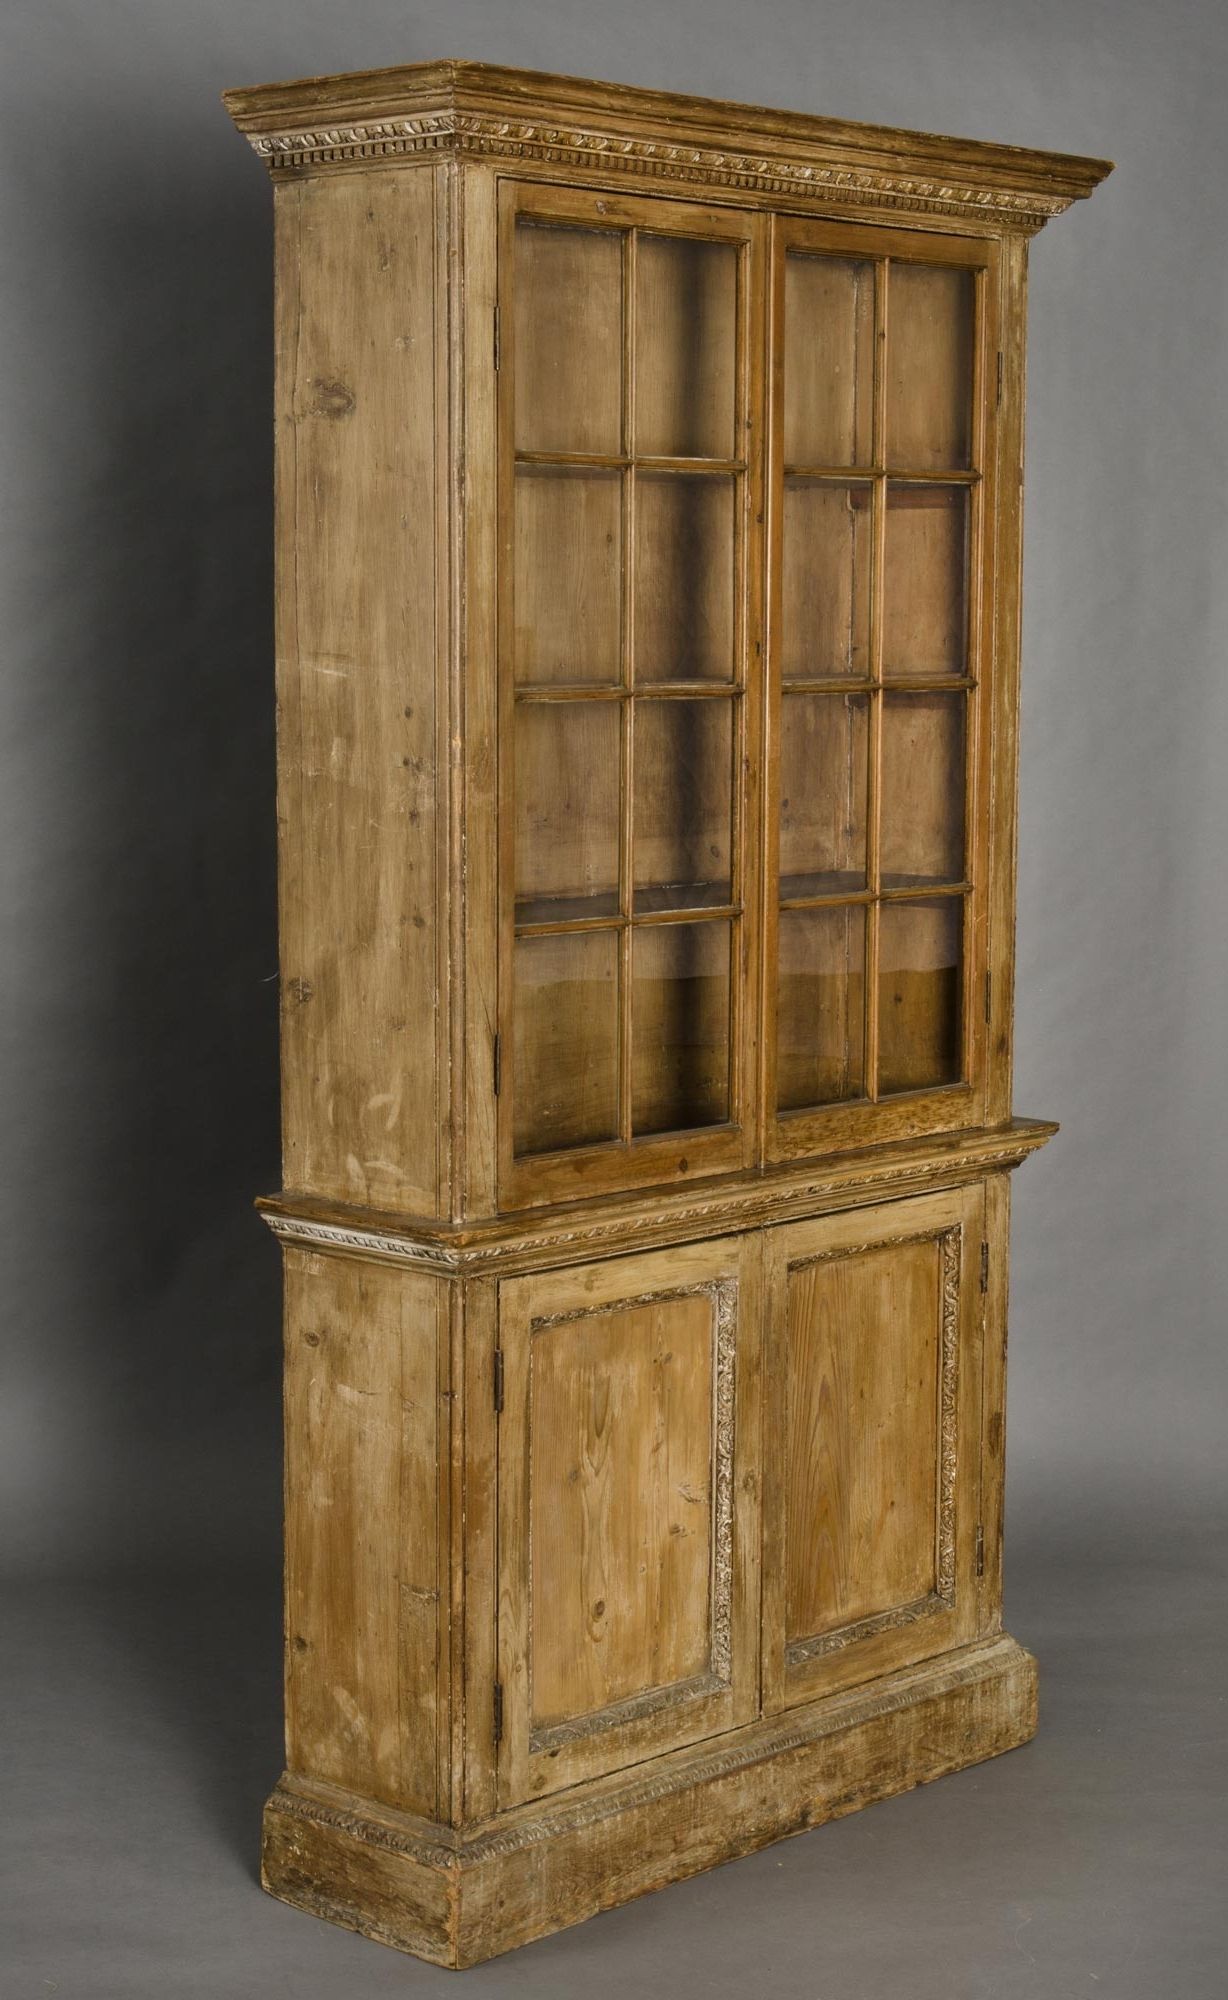 Product » Pair Pine Glazed Bookcases Pertaining To Recent Glazed Bookcases (View 1 of 15)